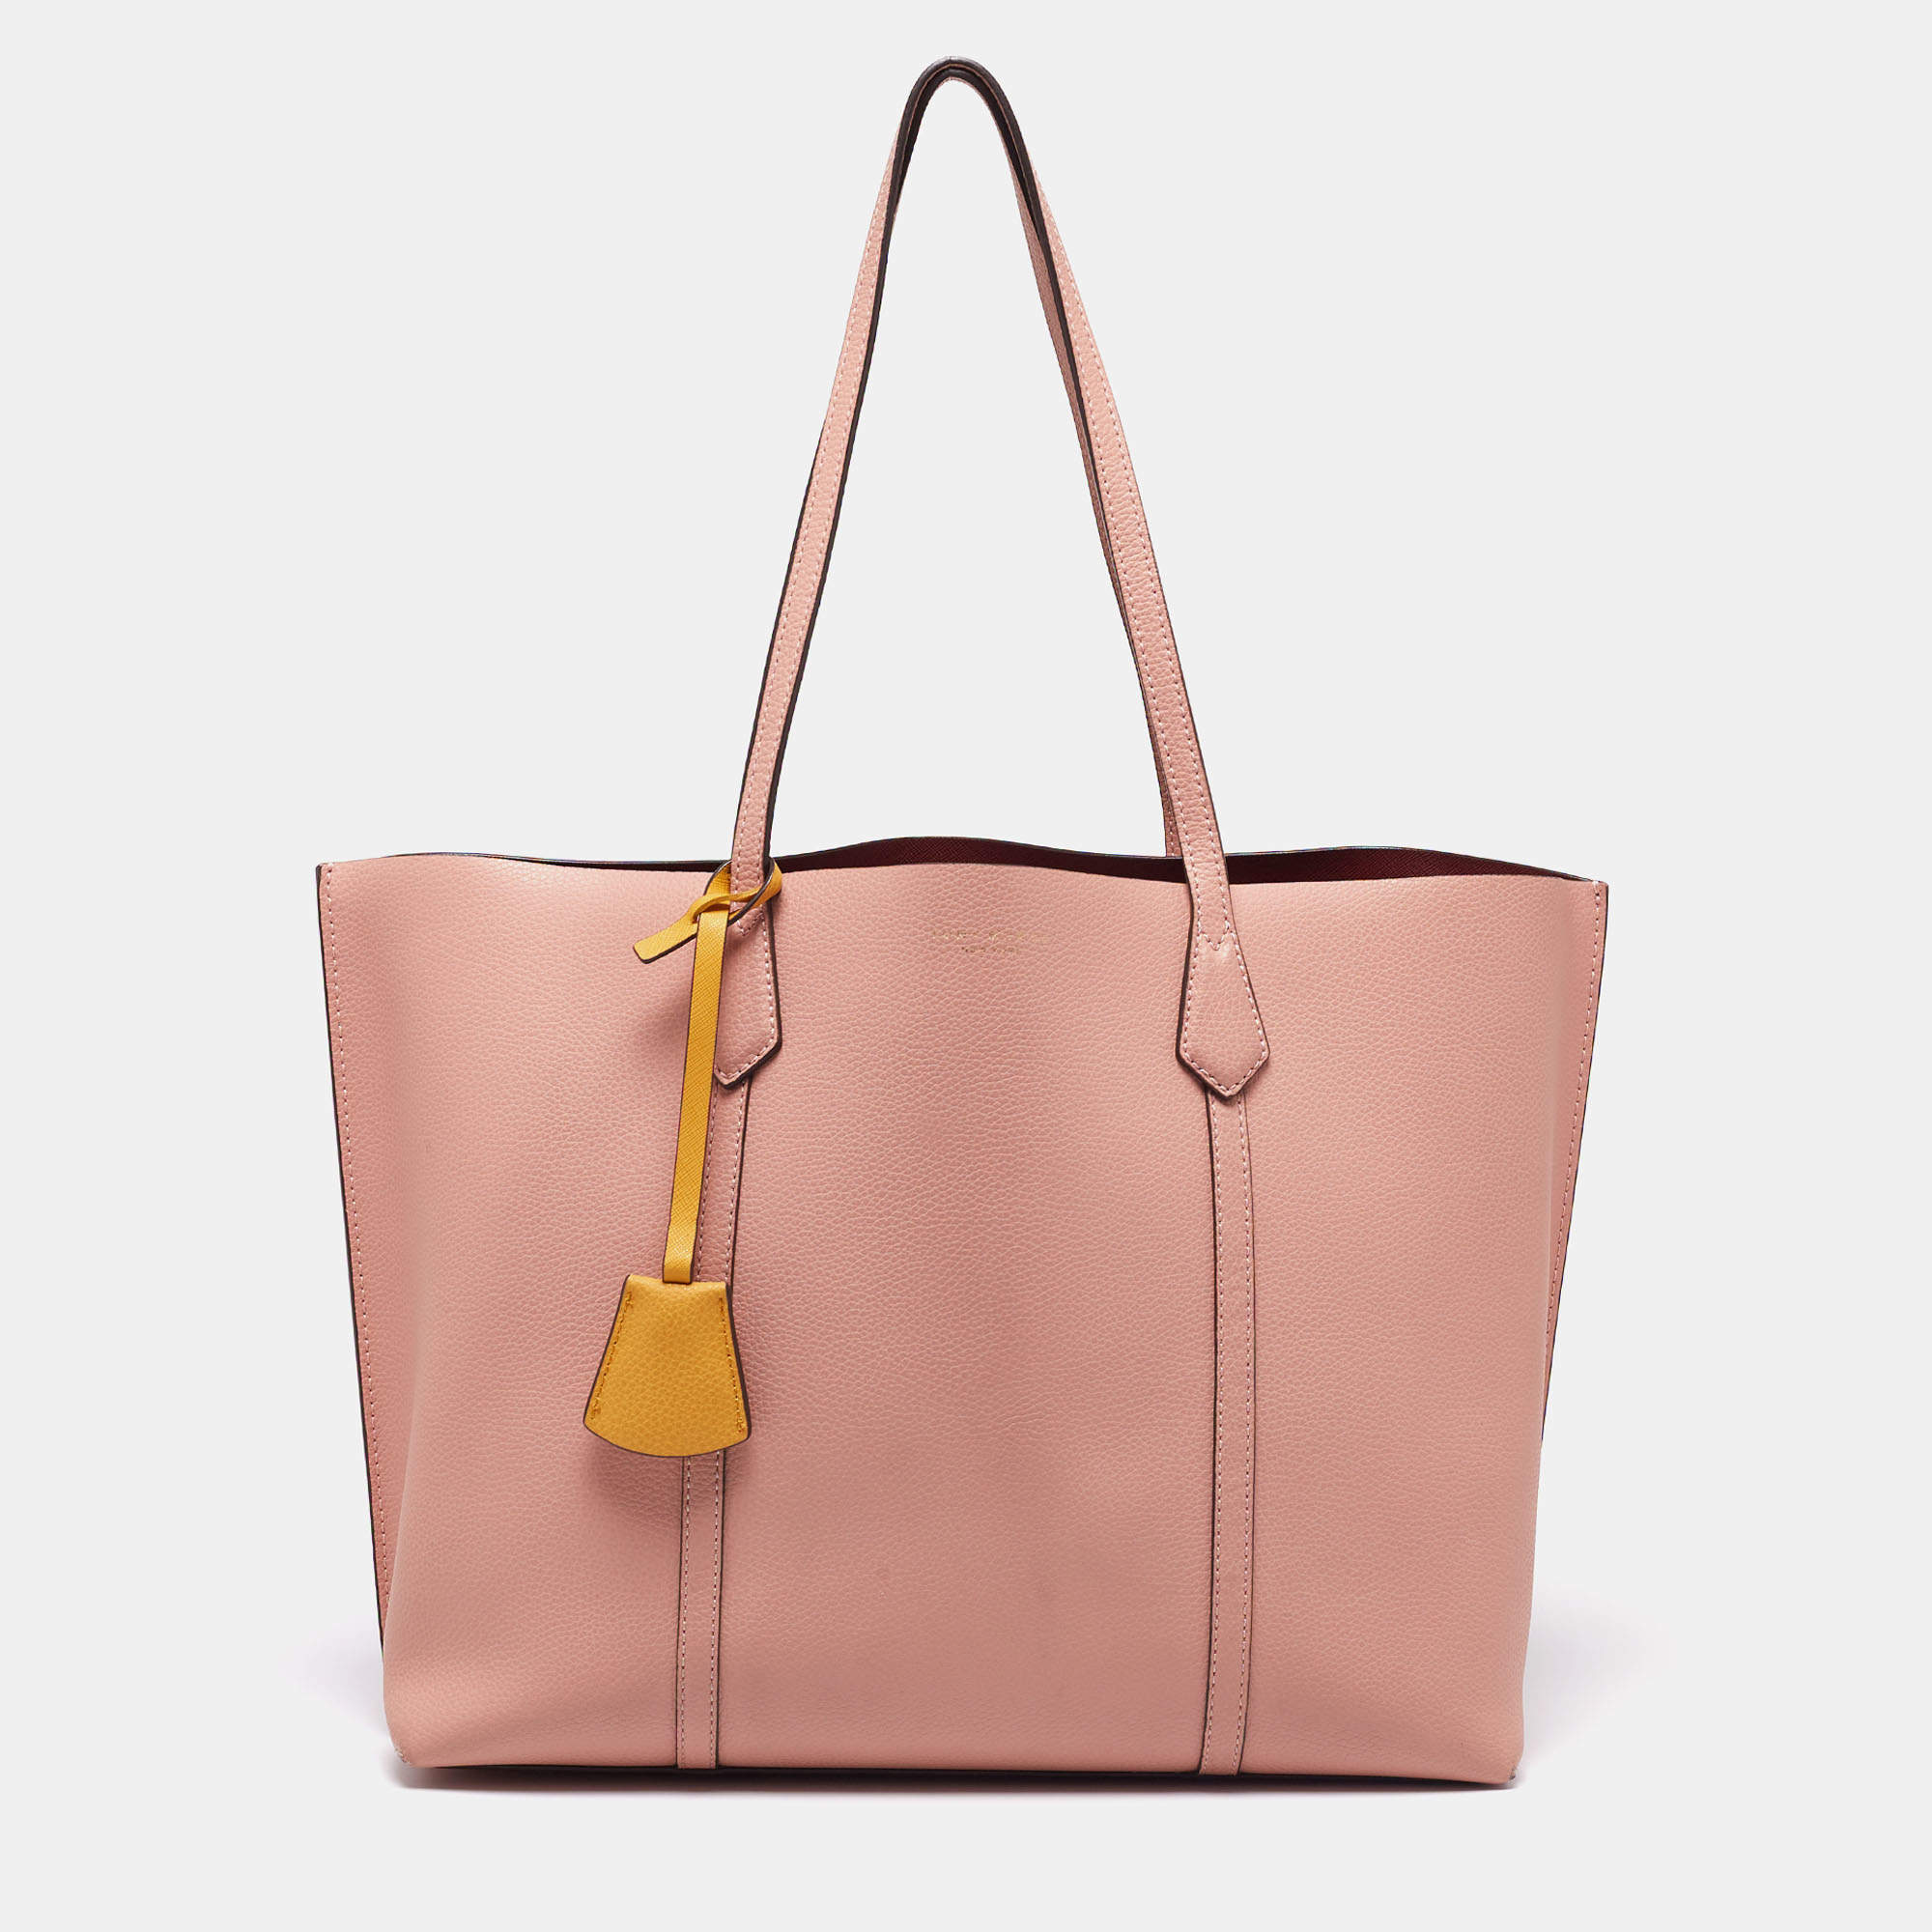 Tory Burch Pink Leather Perry Shopper Tote 